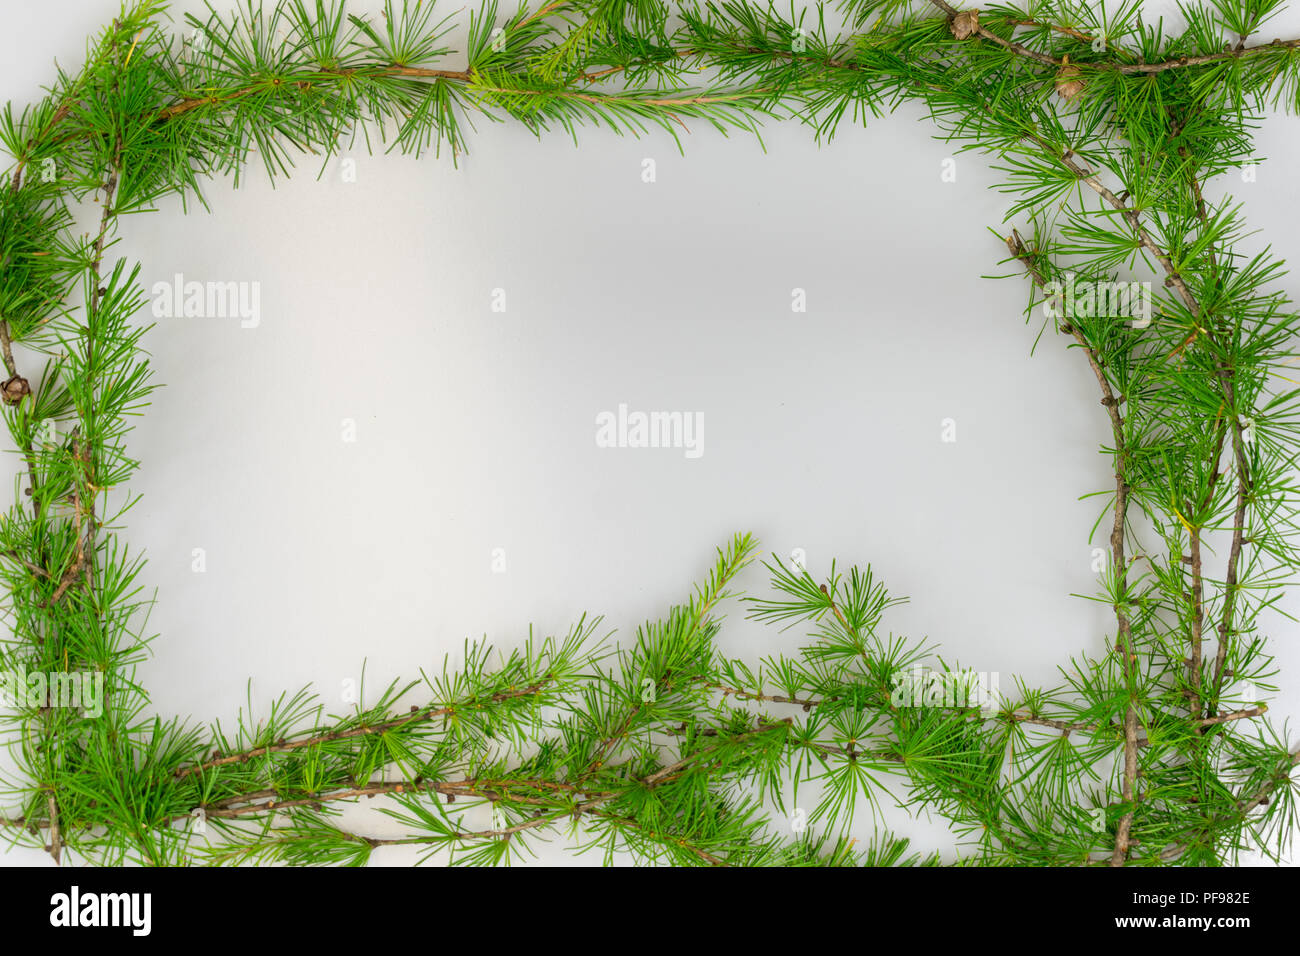 A simple border of Eastern Larch branches with copy space in the middle for your message Stock Photo